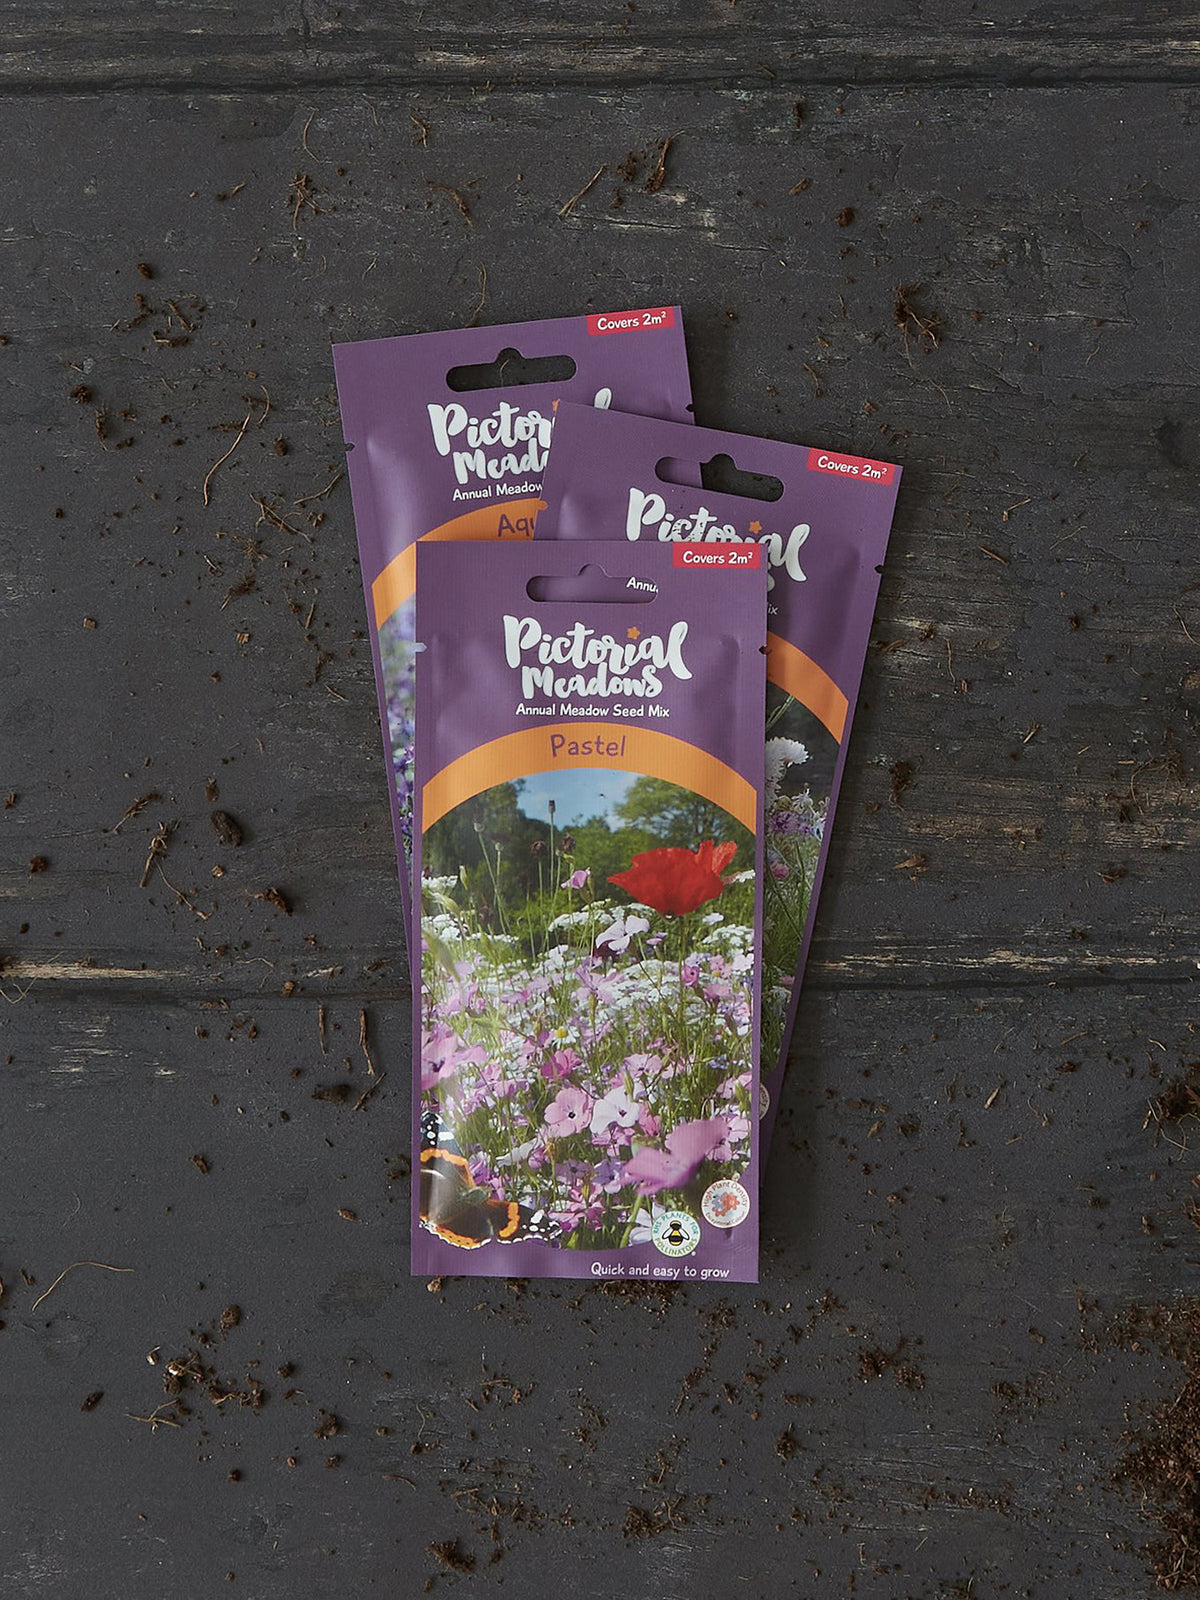 Pastel Annual Meadow Seed Mix